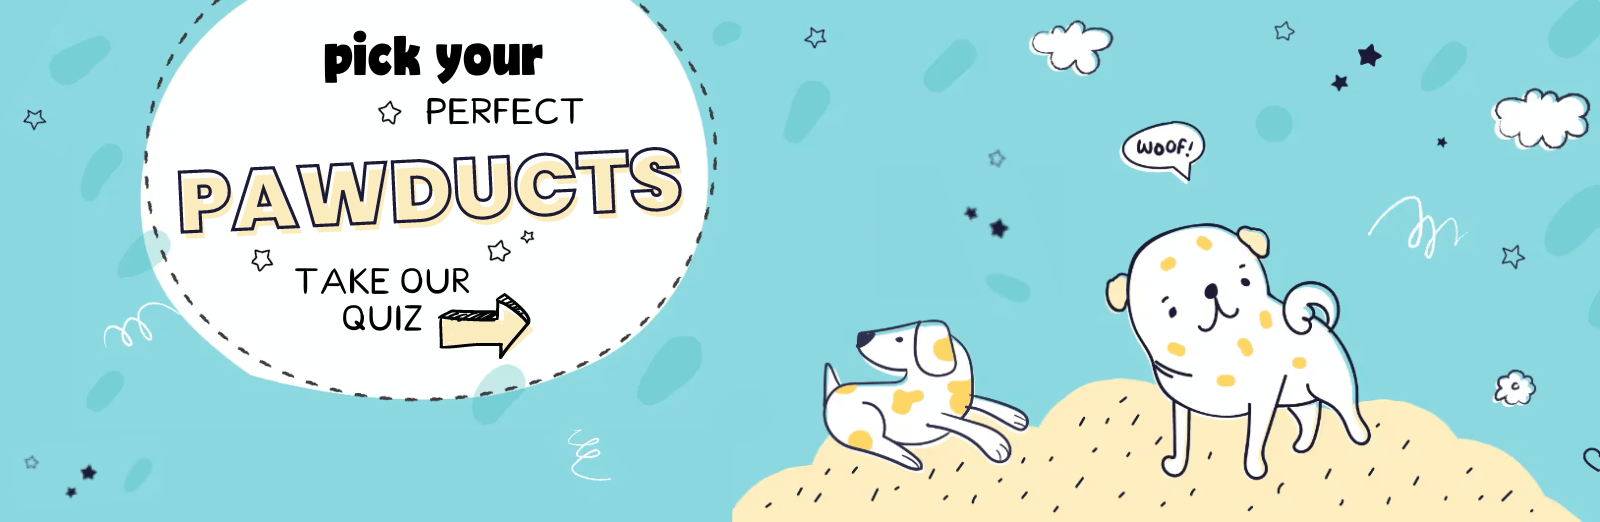 Hand-drawn illustration of two dogs. Text: Pick your perfect pawducts, take our quiz.